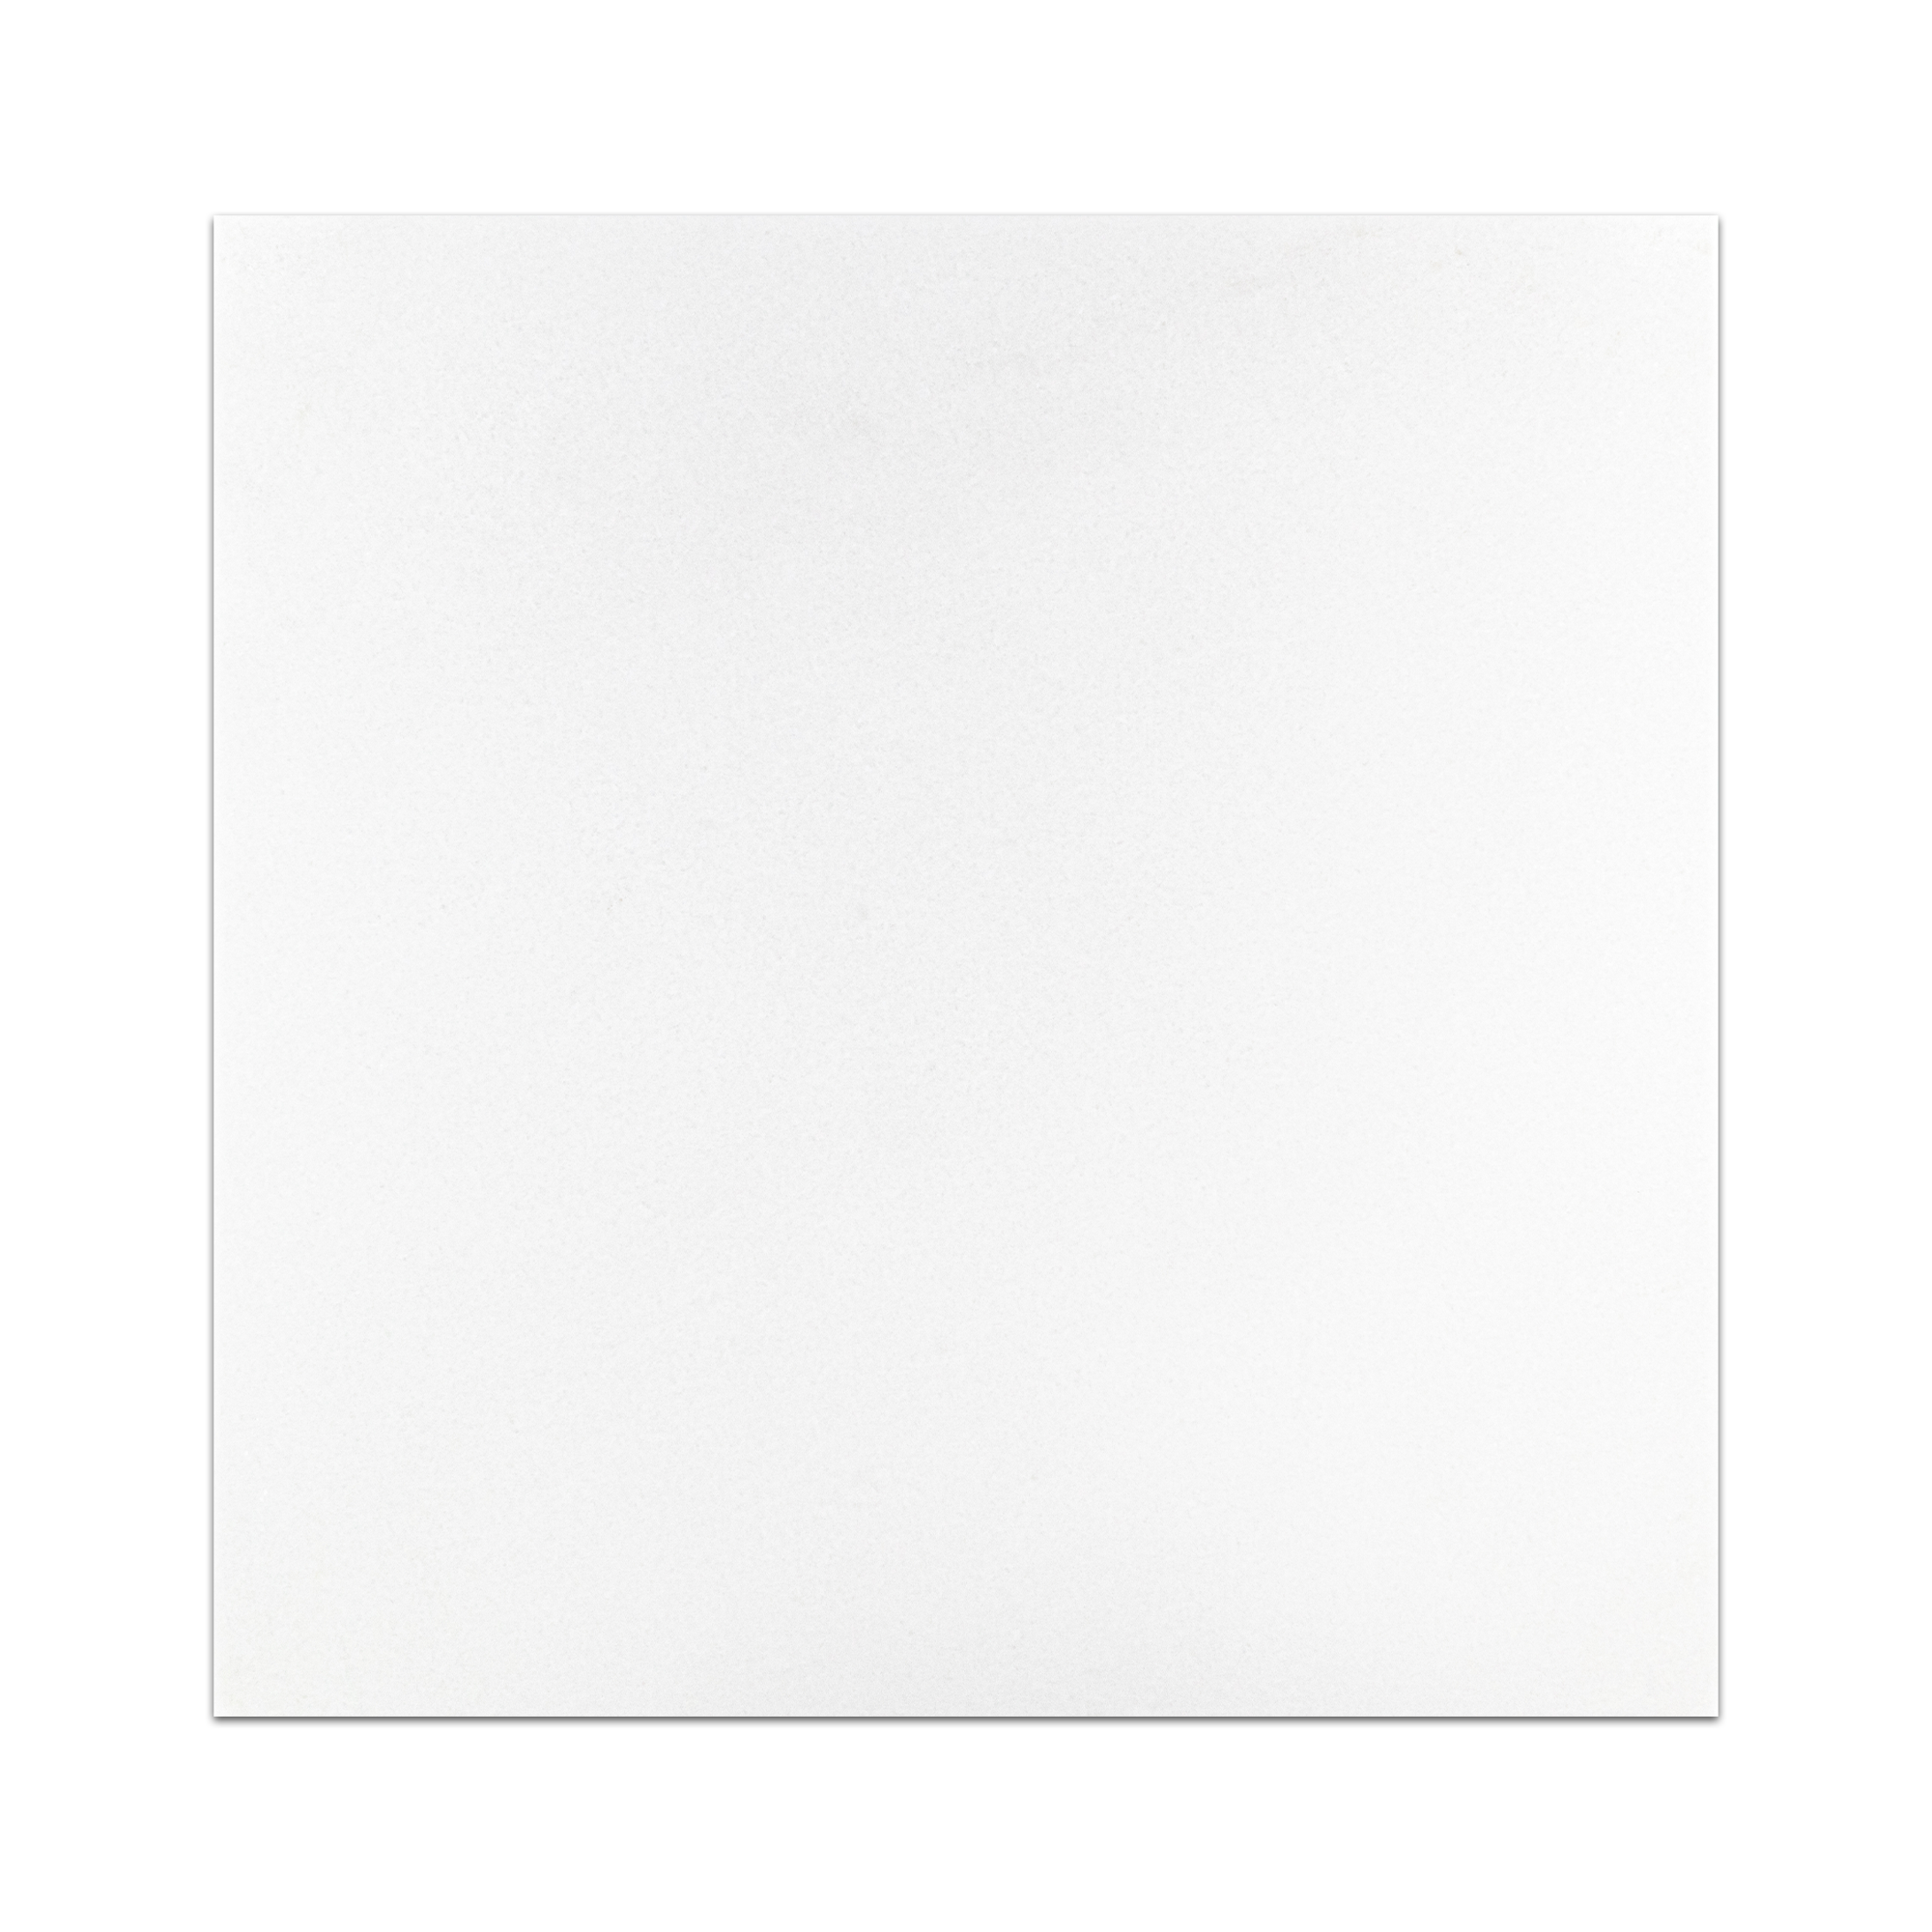 Elon White Thassos Marble Square Field Tile 12x12x0.375 Polished - Surface Group International